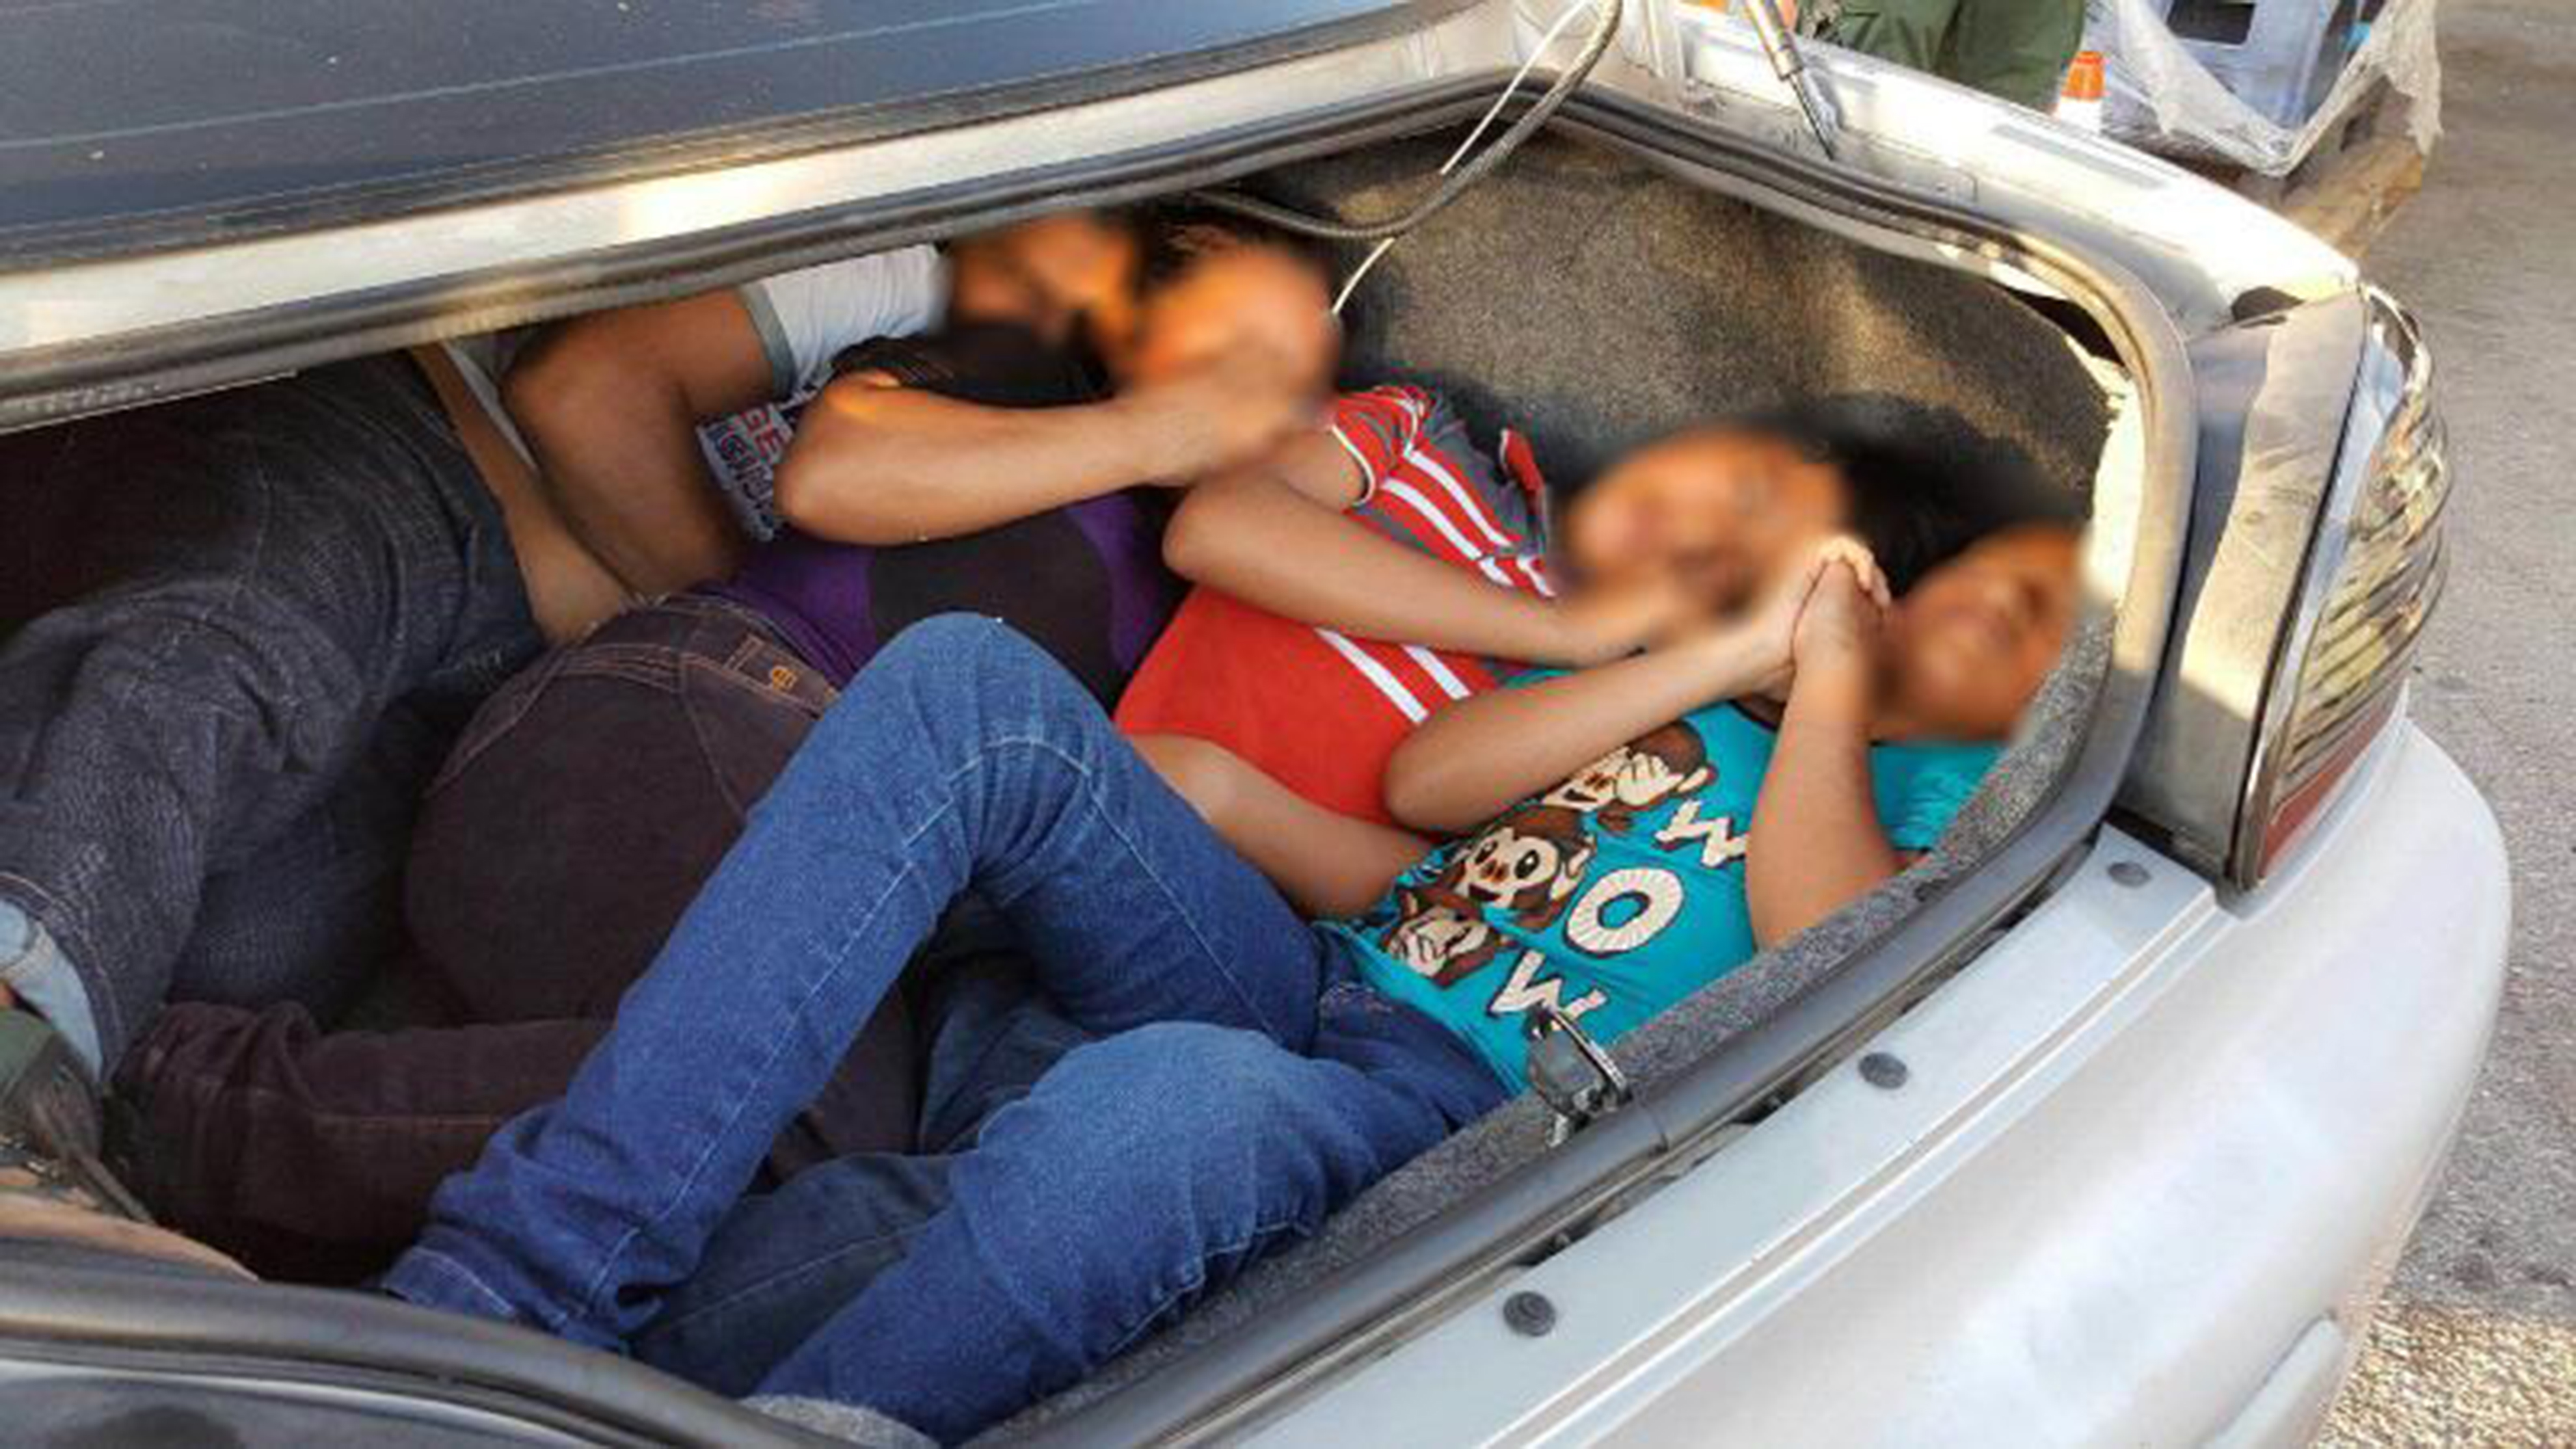 Photo of illegal aliens stashed in a trunk